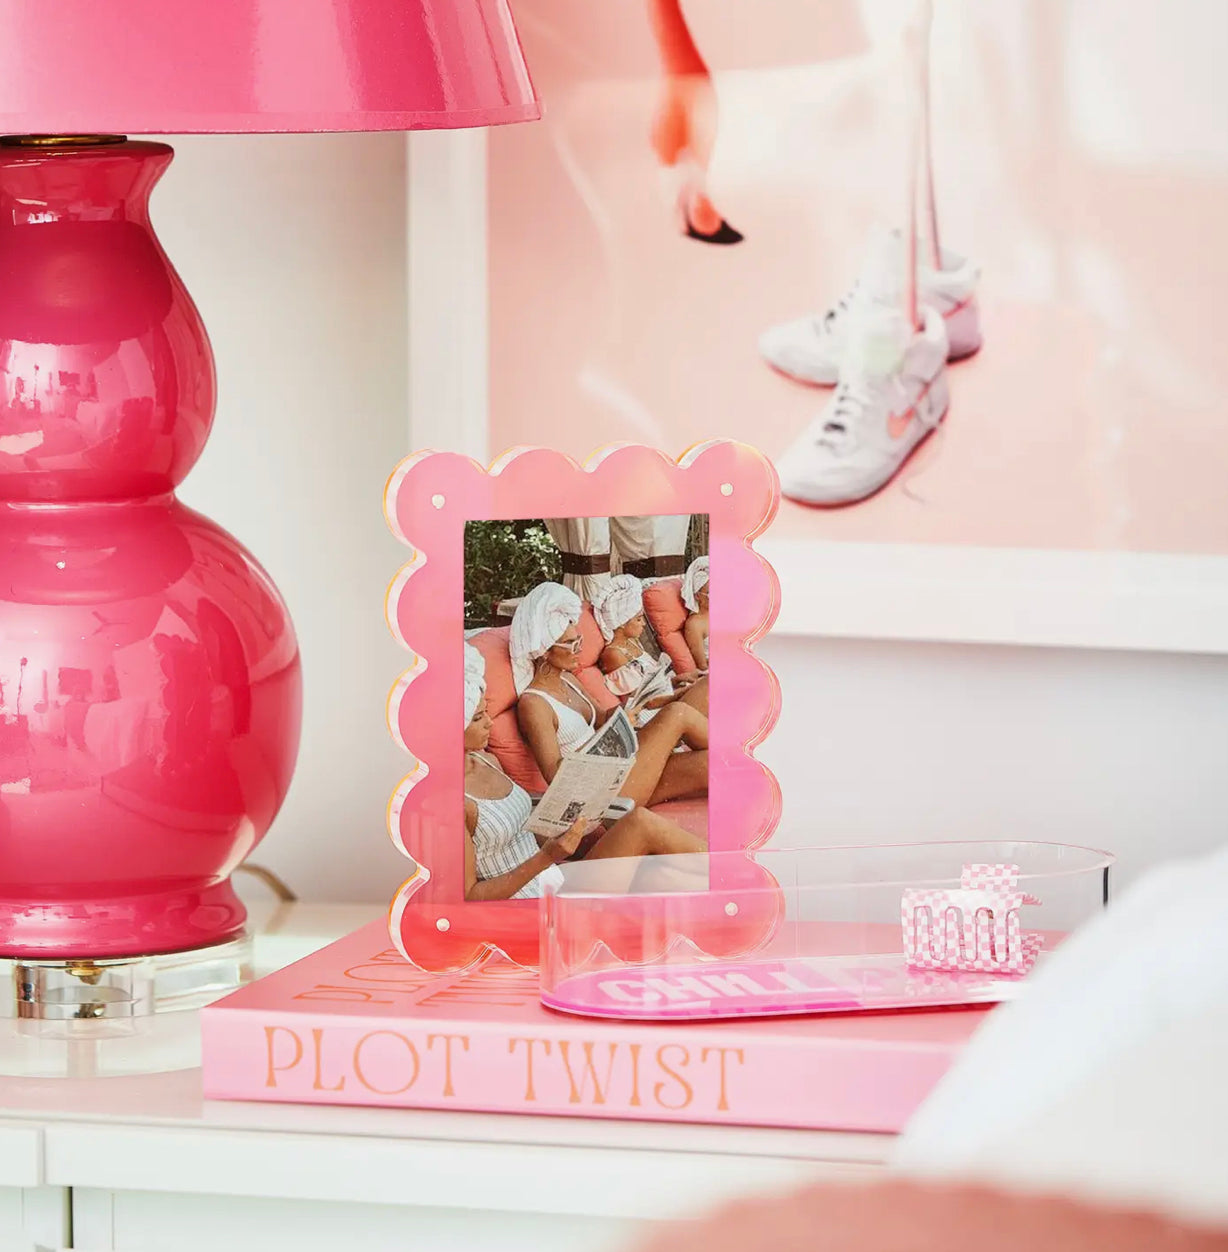 Neon Pink Acrylic Picture Frame